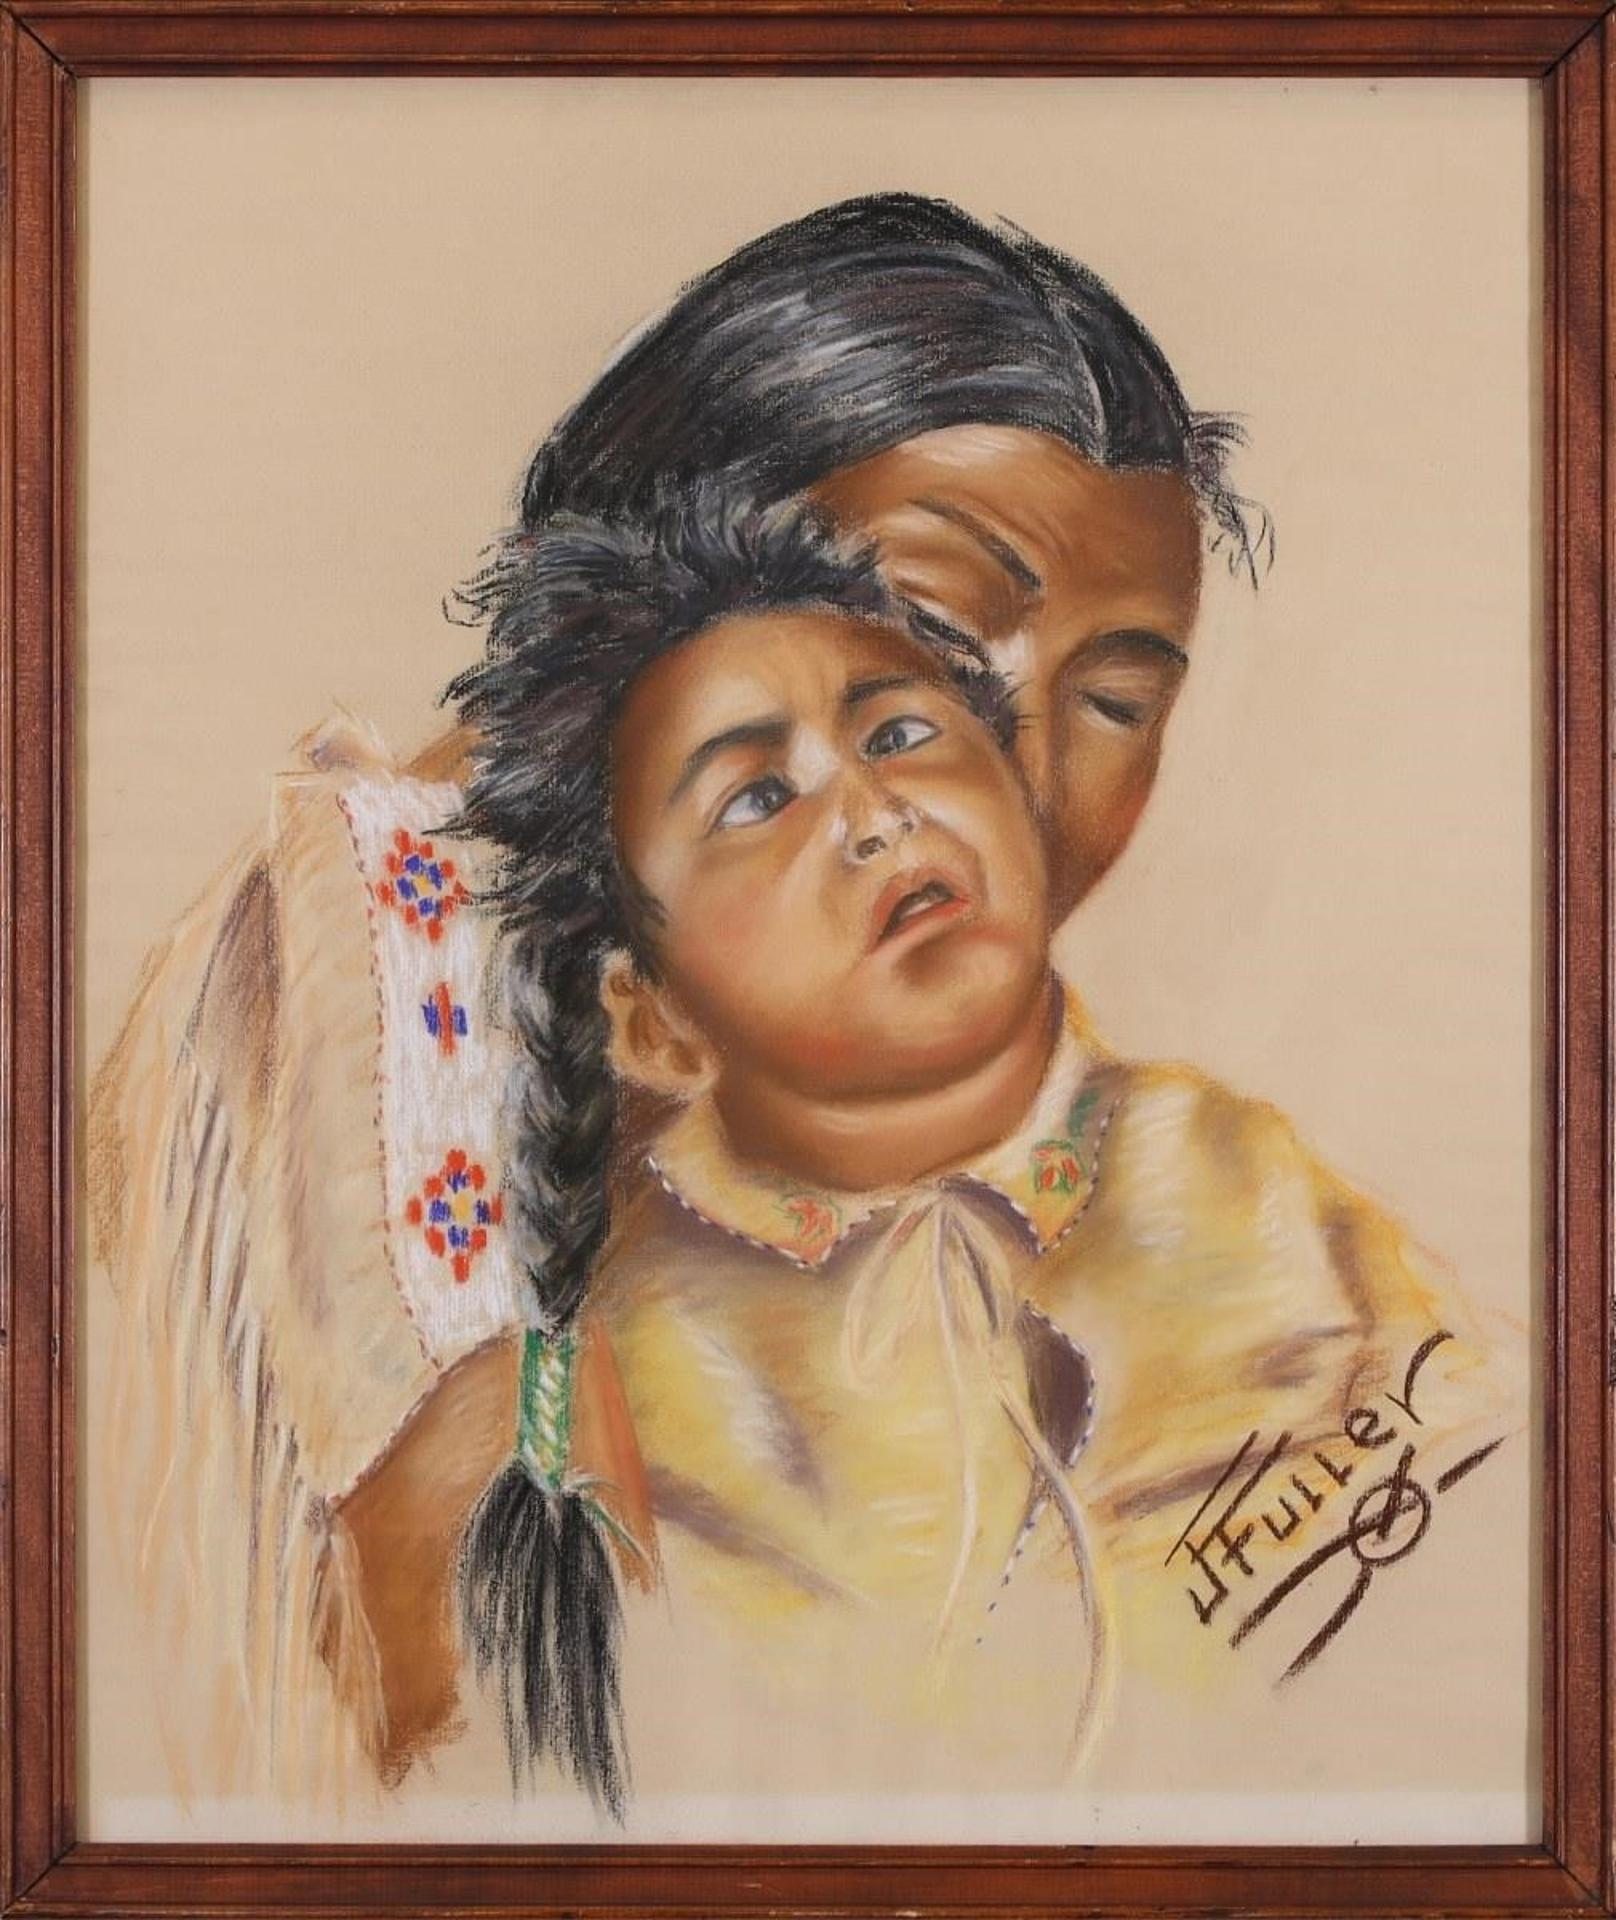 Jack Fuller (1900) - “Blackfoot Mother & a Cross Eyed Papoose”; 1959